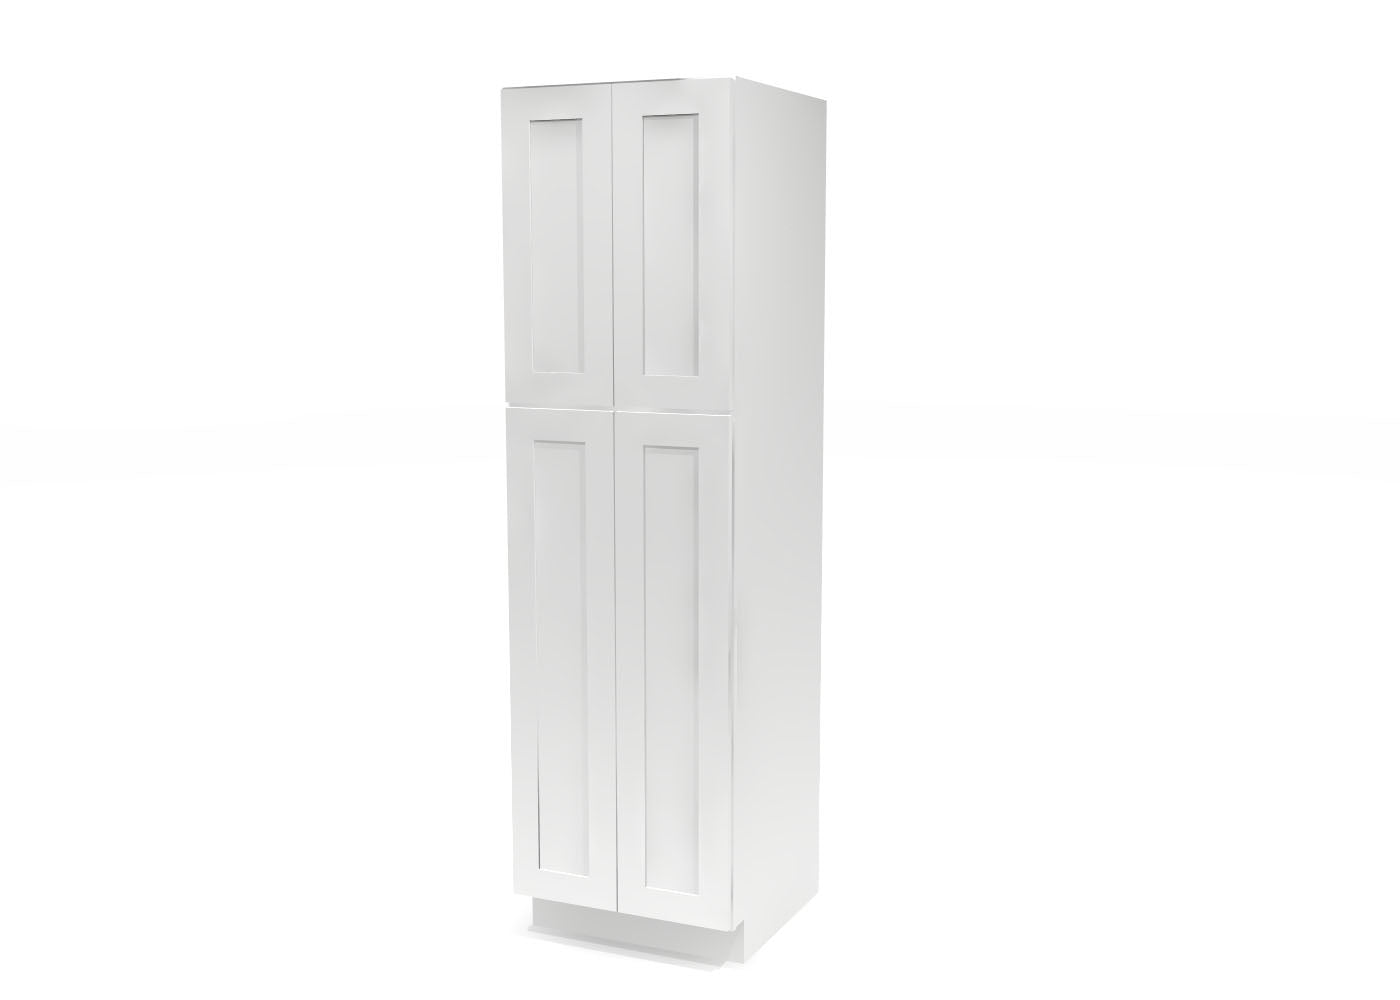 Utility Pantry Double Door 84" by 24" Wide White Shaker Cabinet